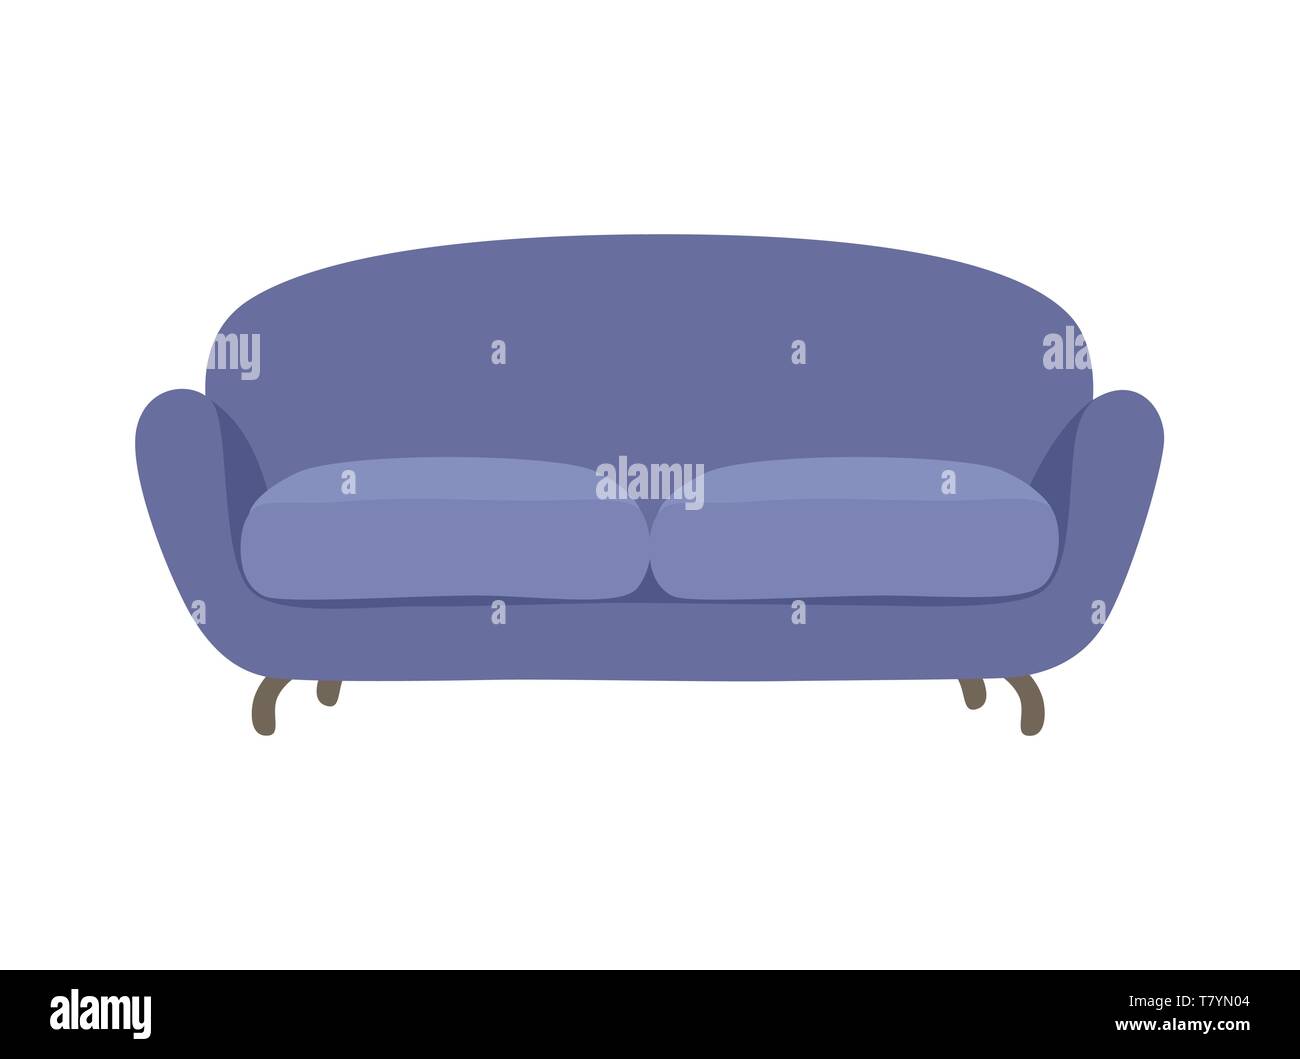 Sofa and couch blue colorful cartoon illustration vector. Comfortable lounge for interior design isolated on white background. Stock Vector